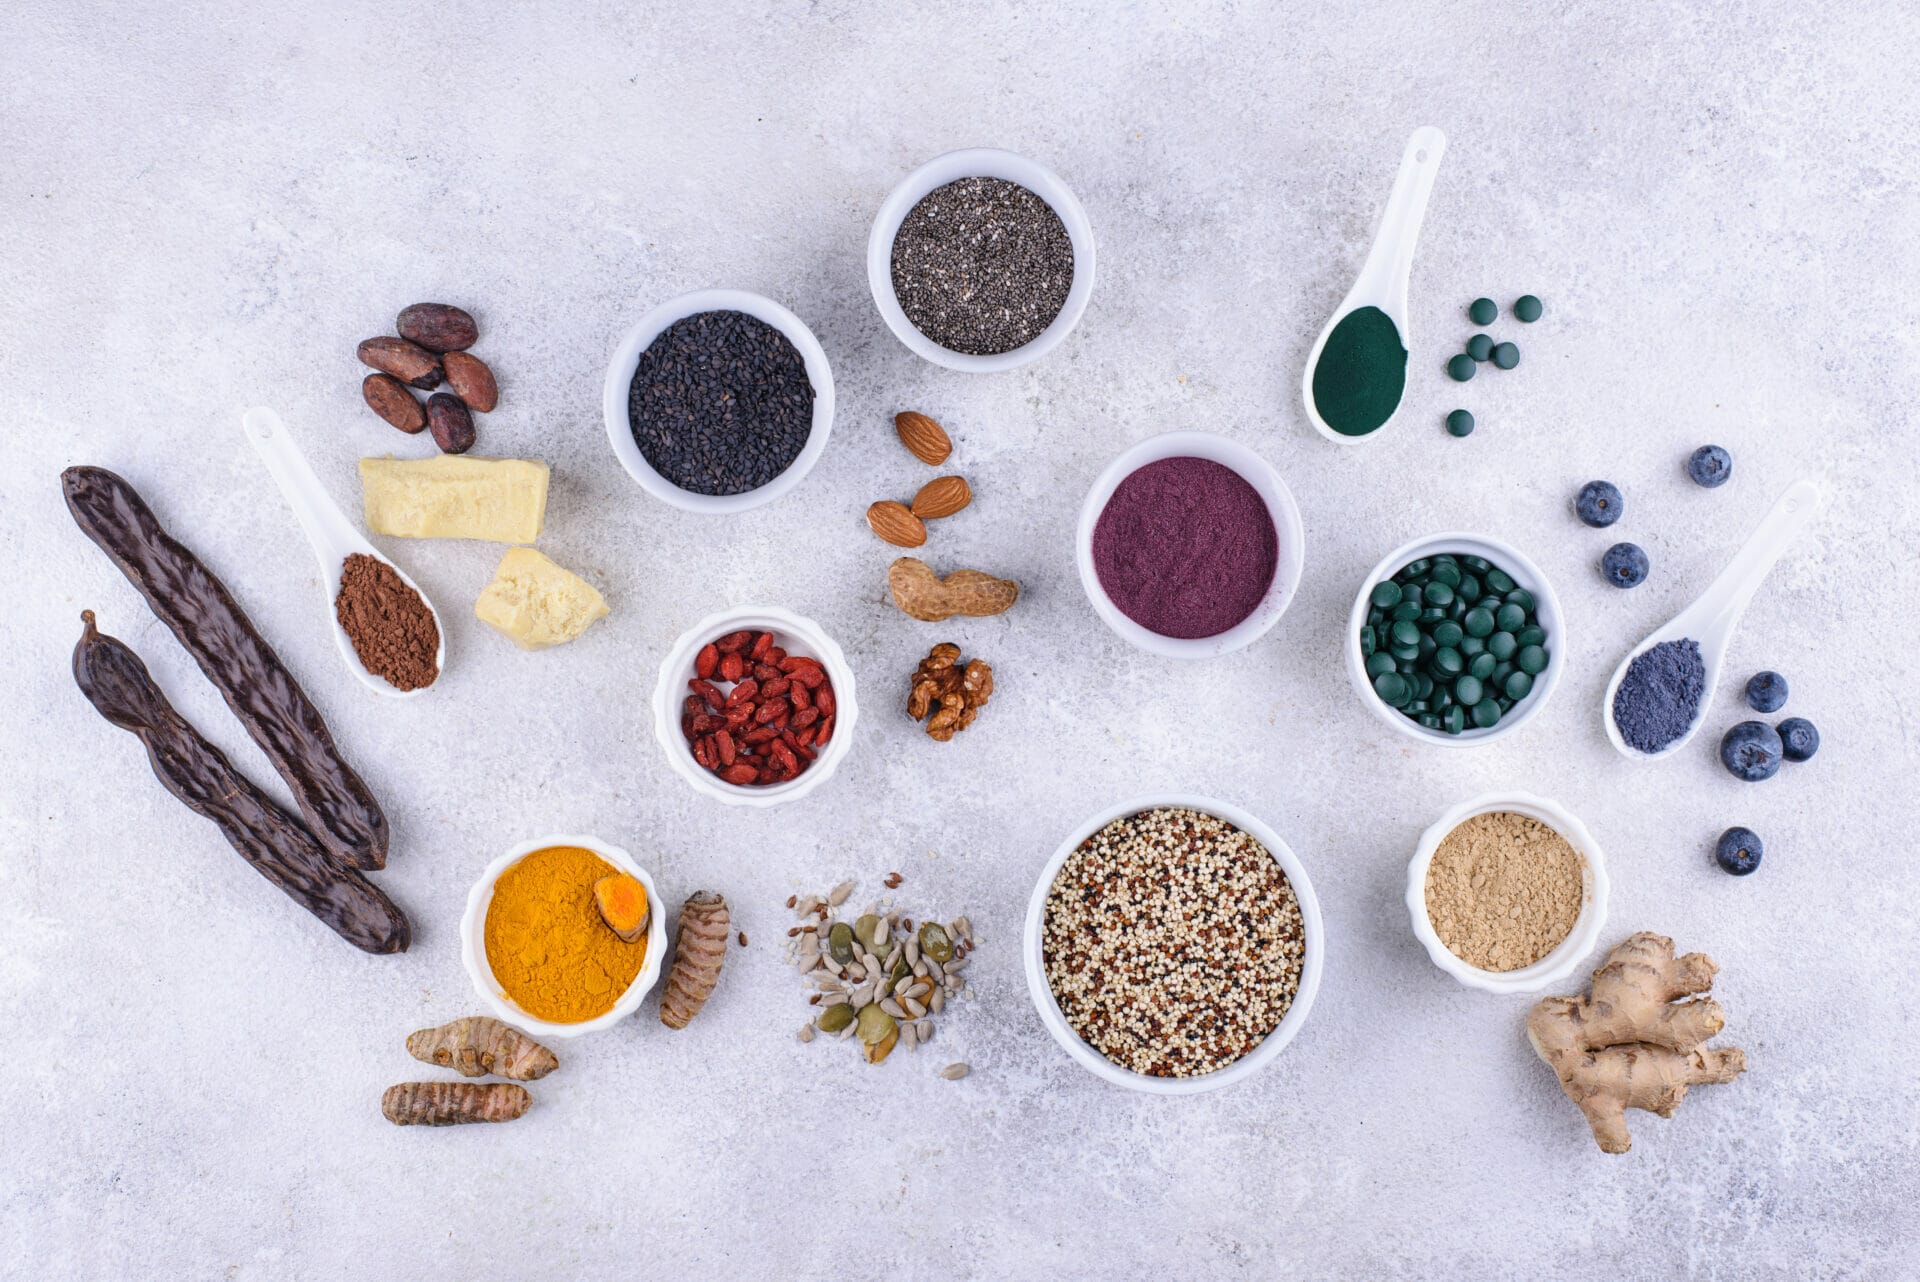 What are Food supplements and what do you need to know about them?